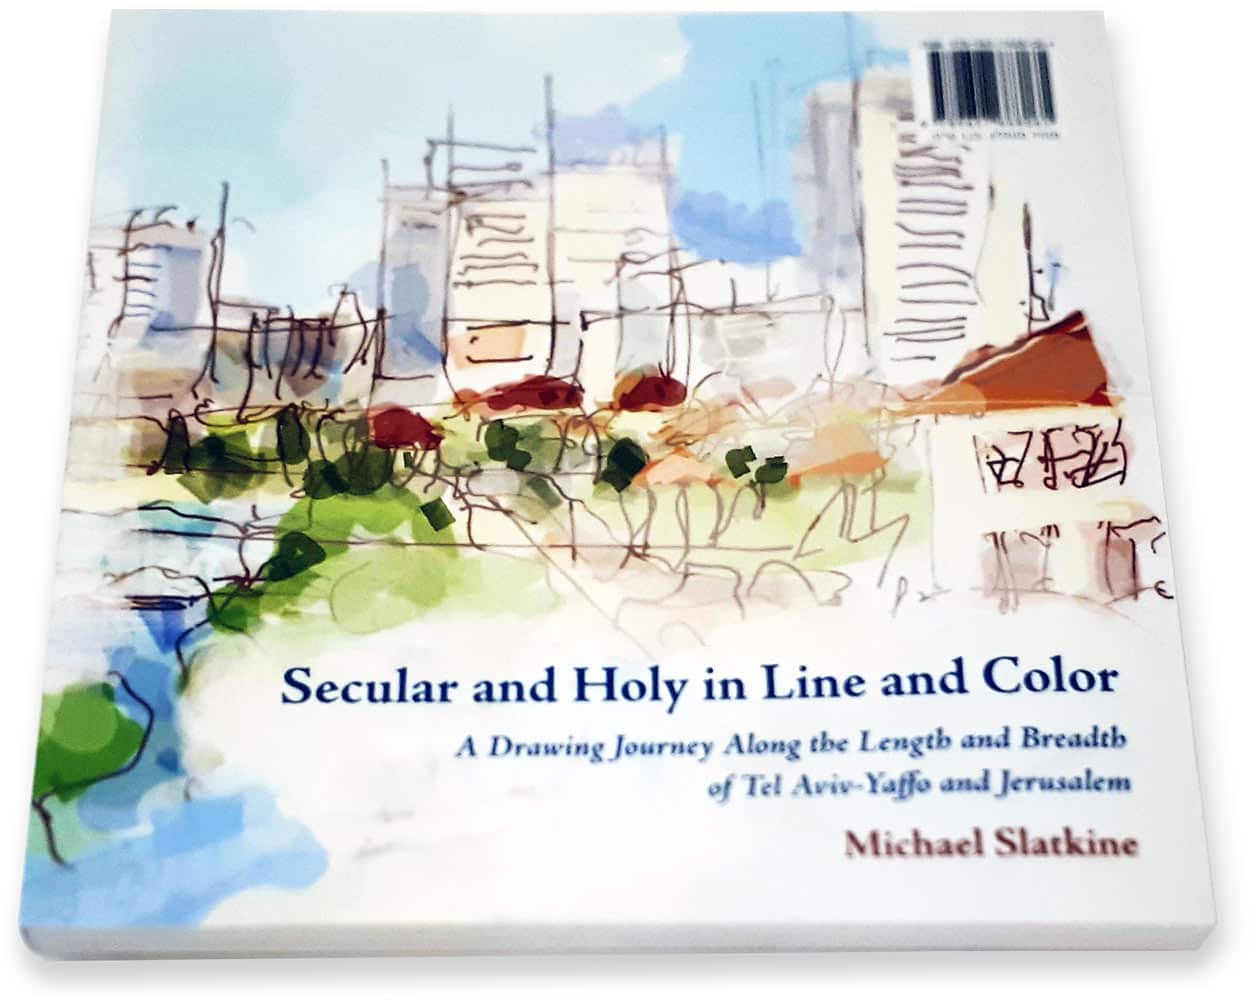 Cover of the book "secular and Holy in Line and Color " A journey along the length and breadth of Tel Aviv Yaffo and Jerusalem